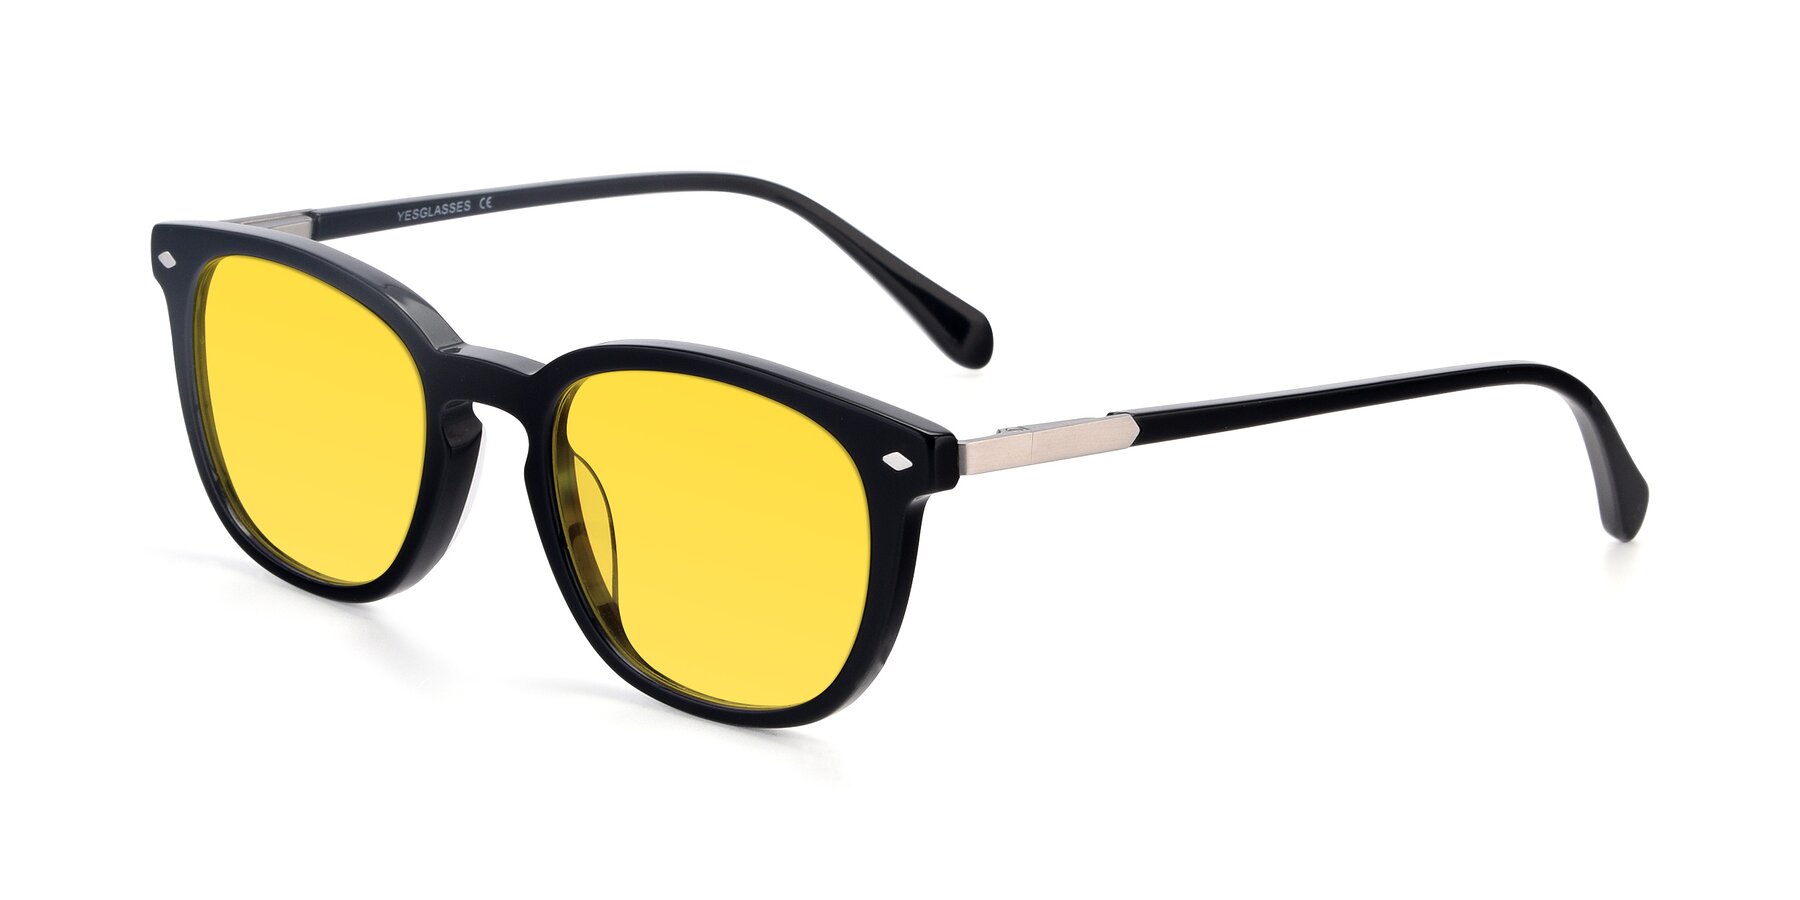 Angle of 17578 in Black with Yellow Tinted Lenses